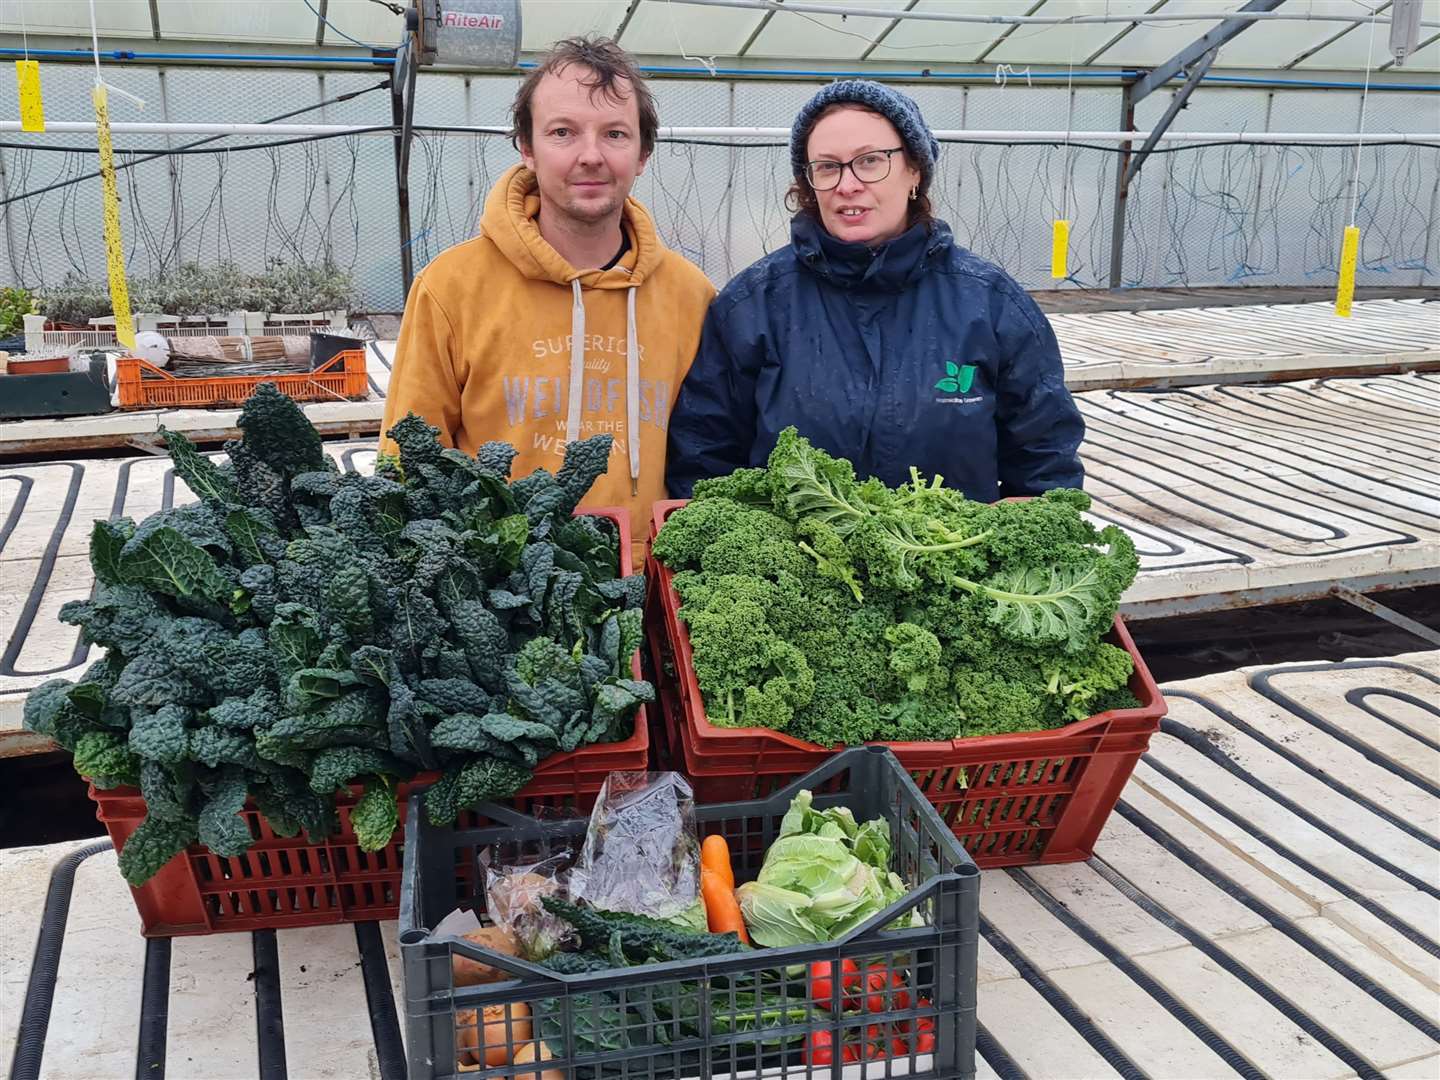 Paul and Michelle Vesey-Wells run East Kent Growers and hope to buy the site